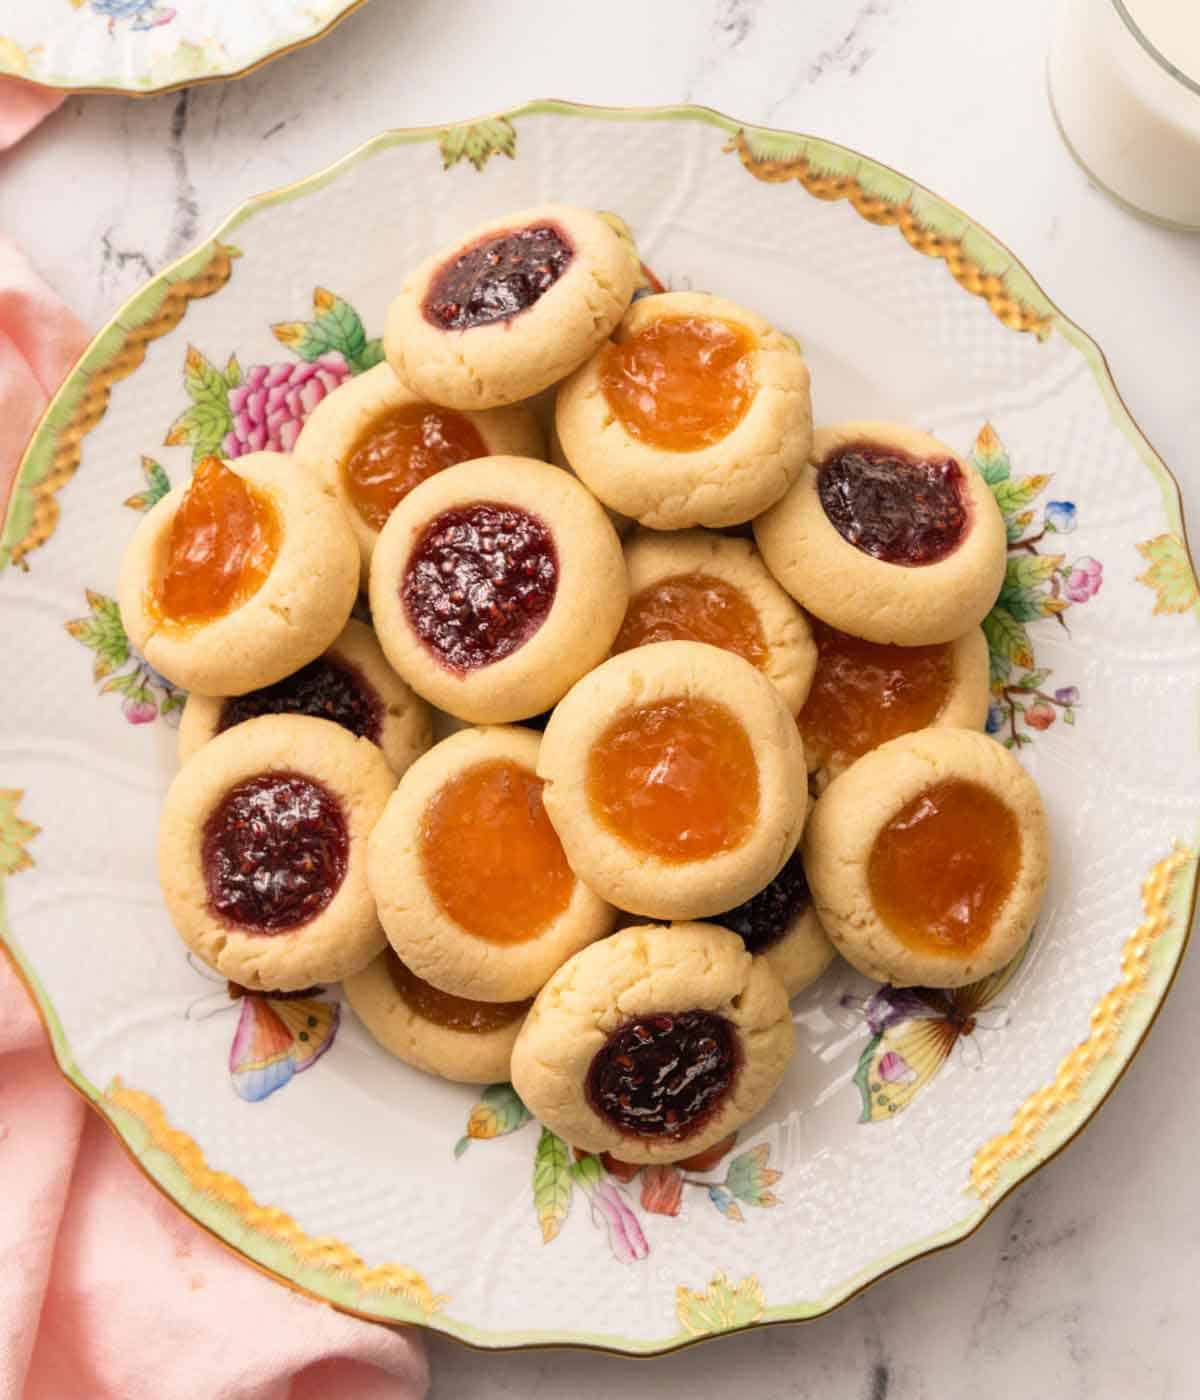 Overhead view of a plate of thumbprint cookies.